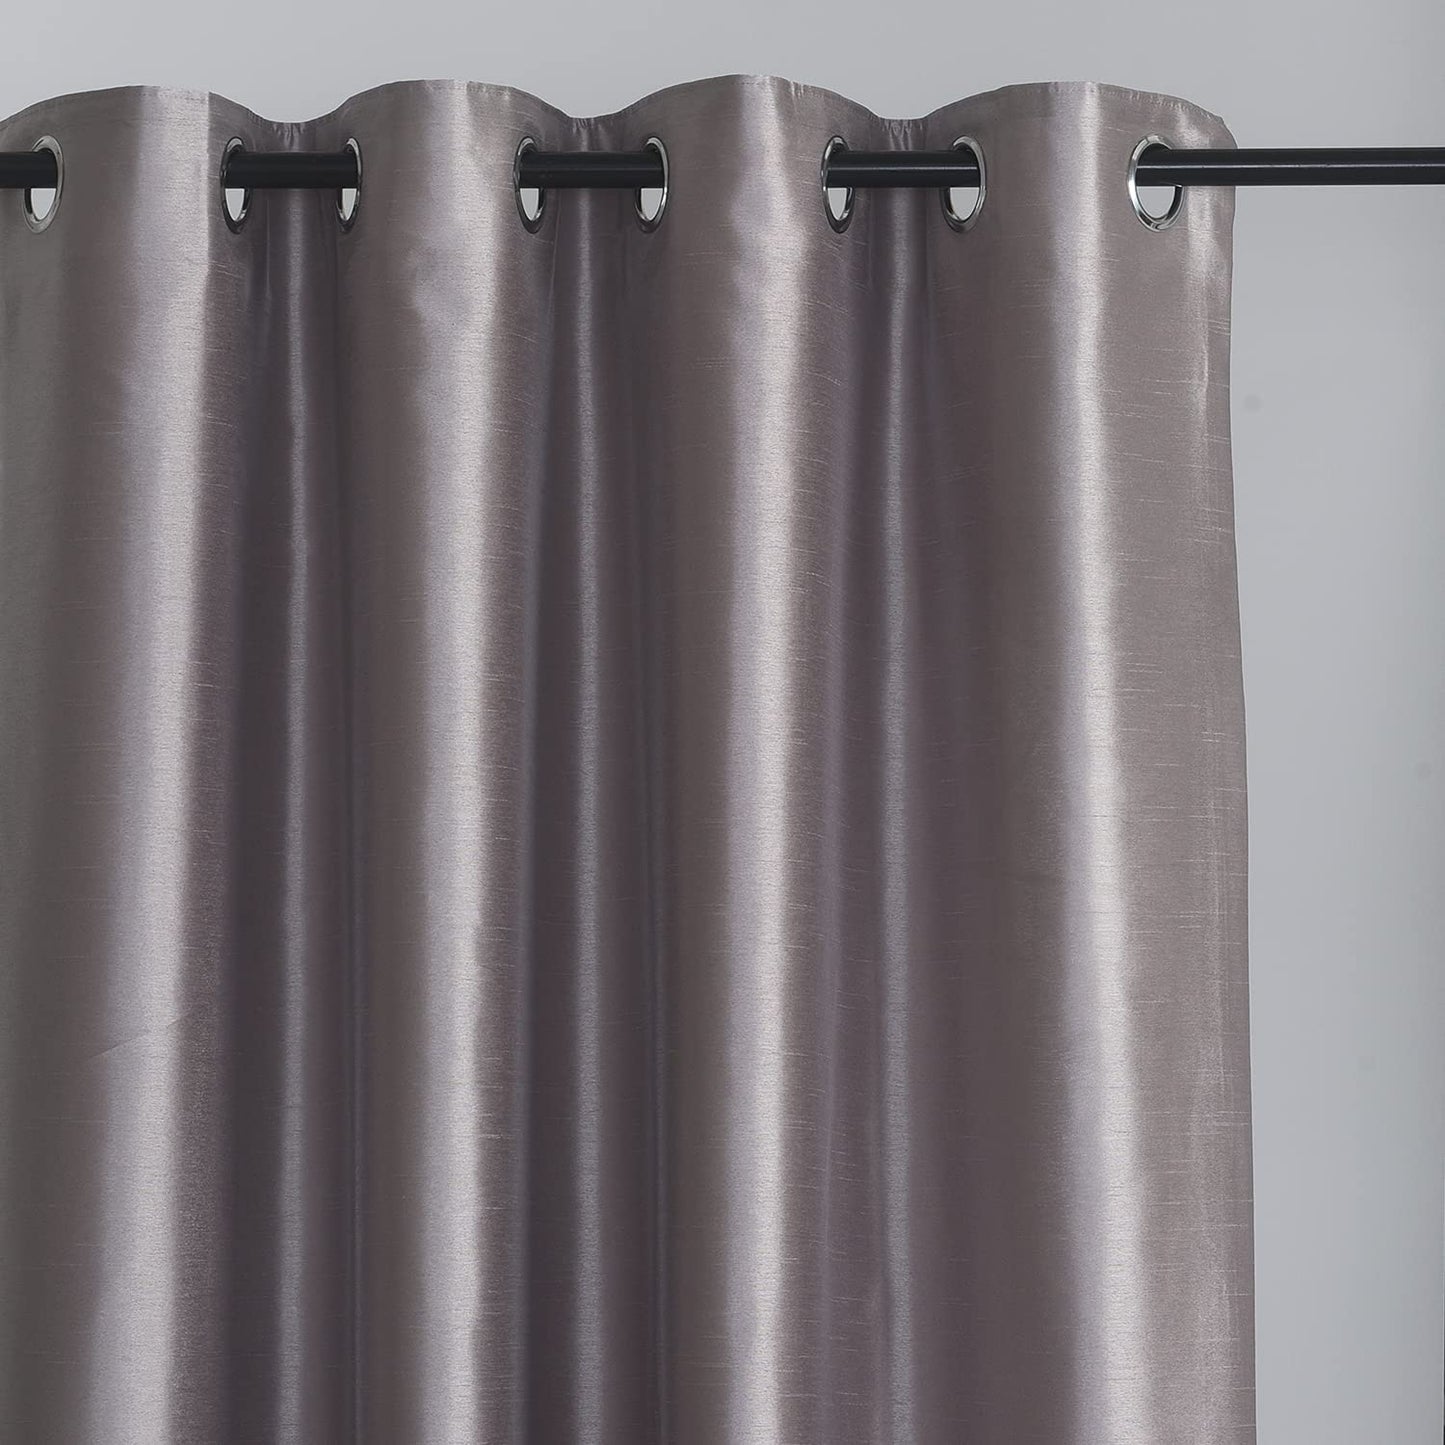 Warm Grey Faux Silk Blackout Curtains,Fully Beige Lined Solid Color Window Treatment Drapes(Sold By Pair)